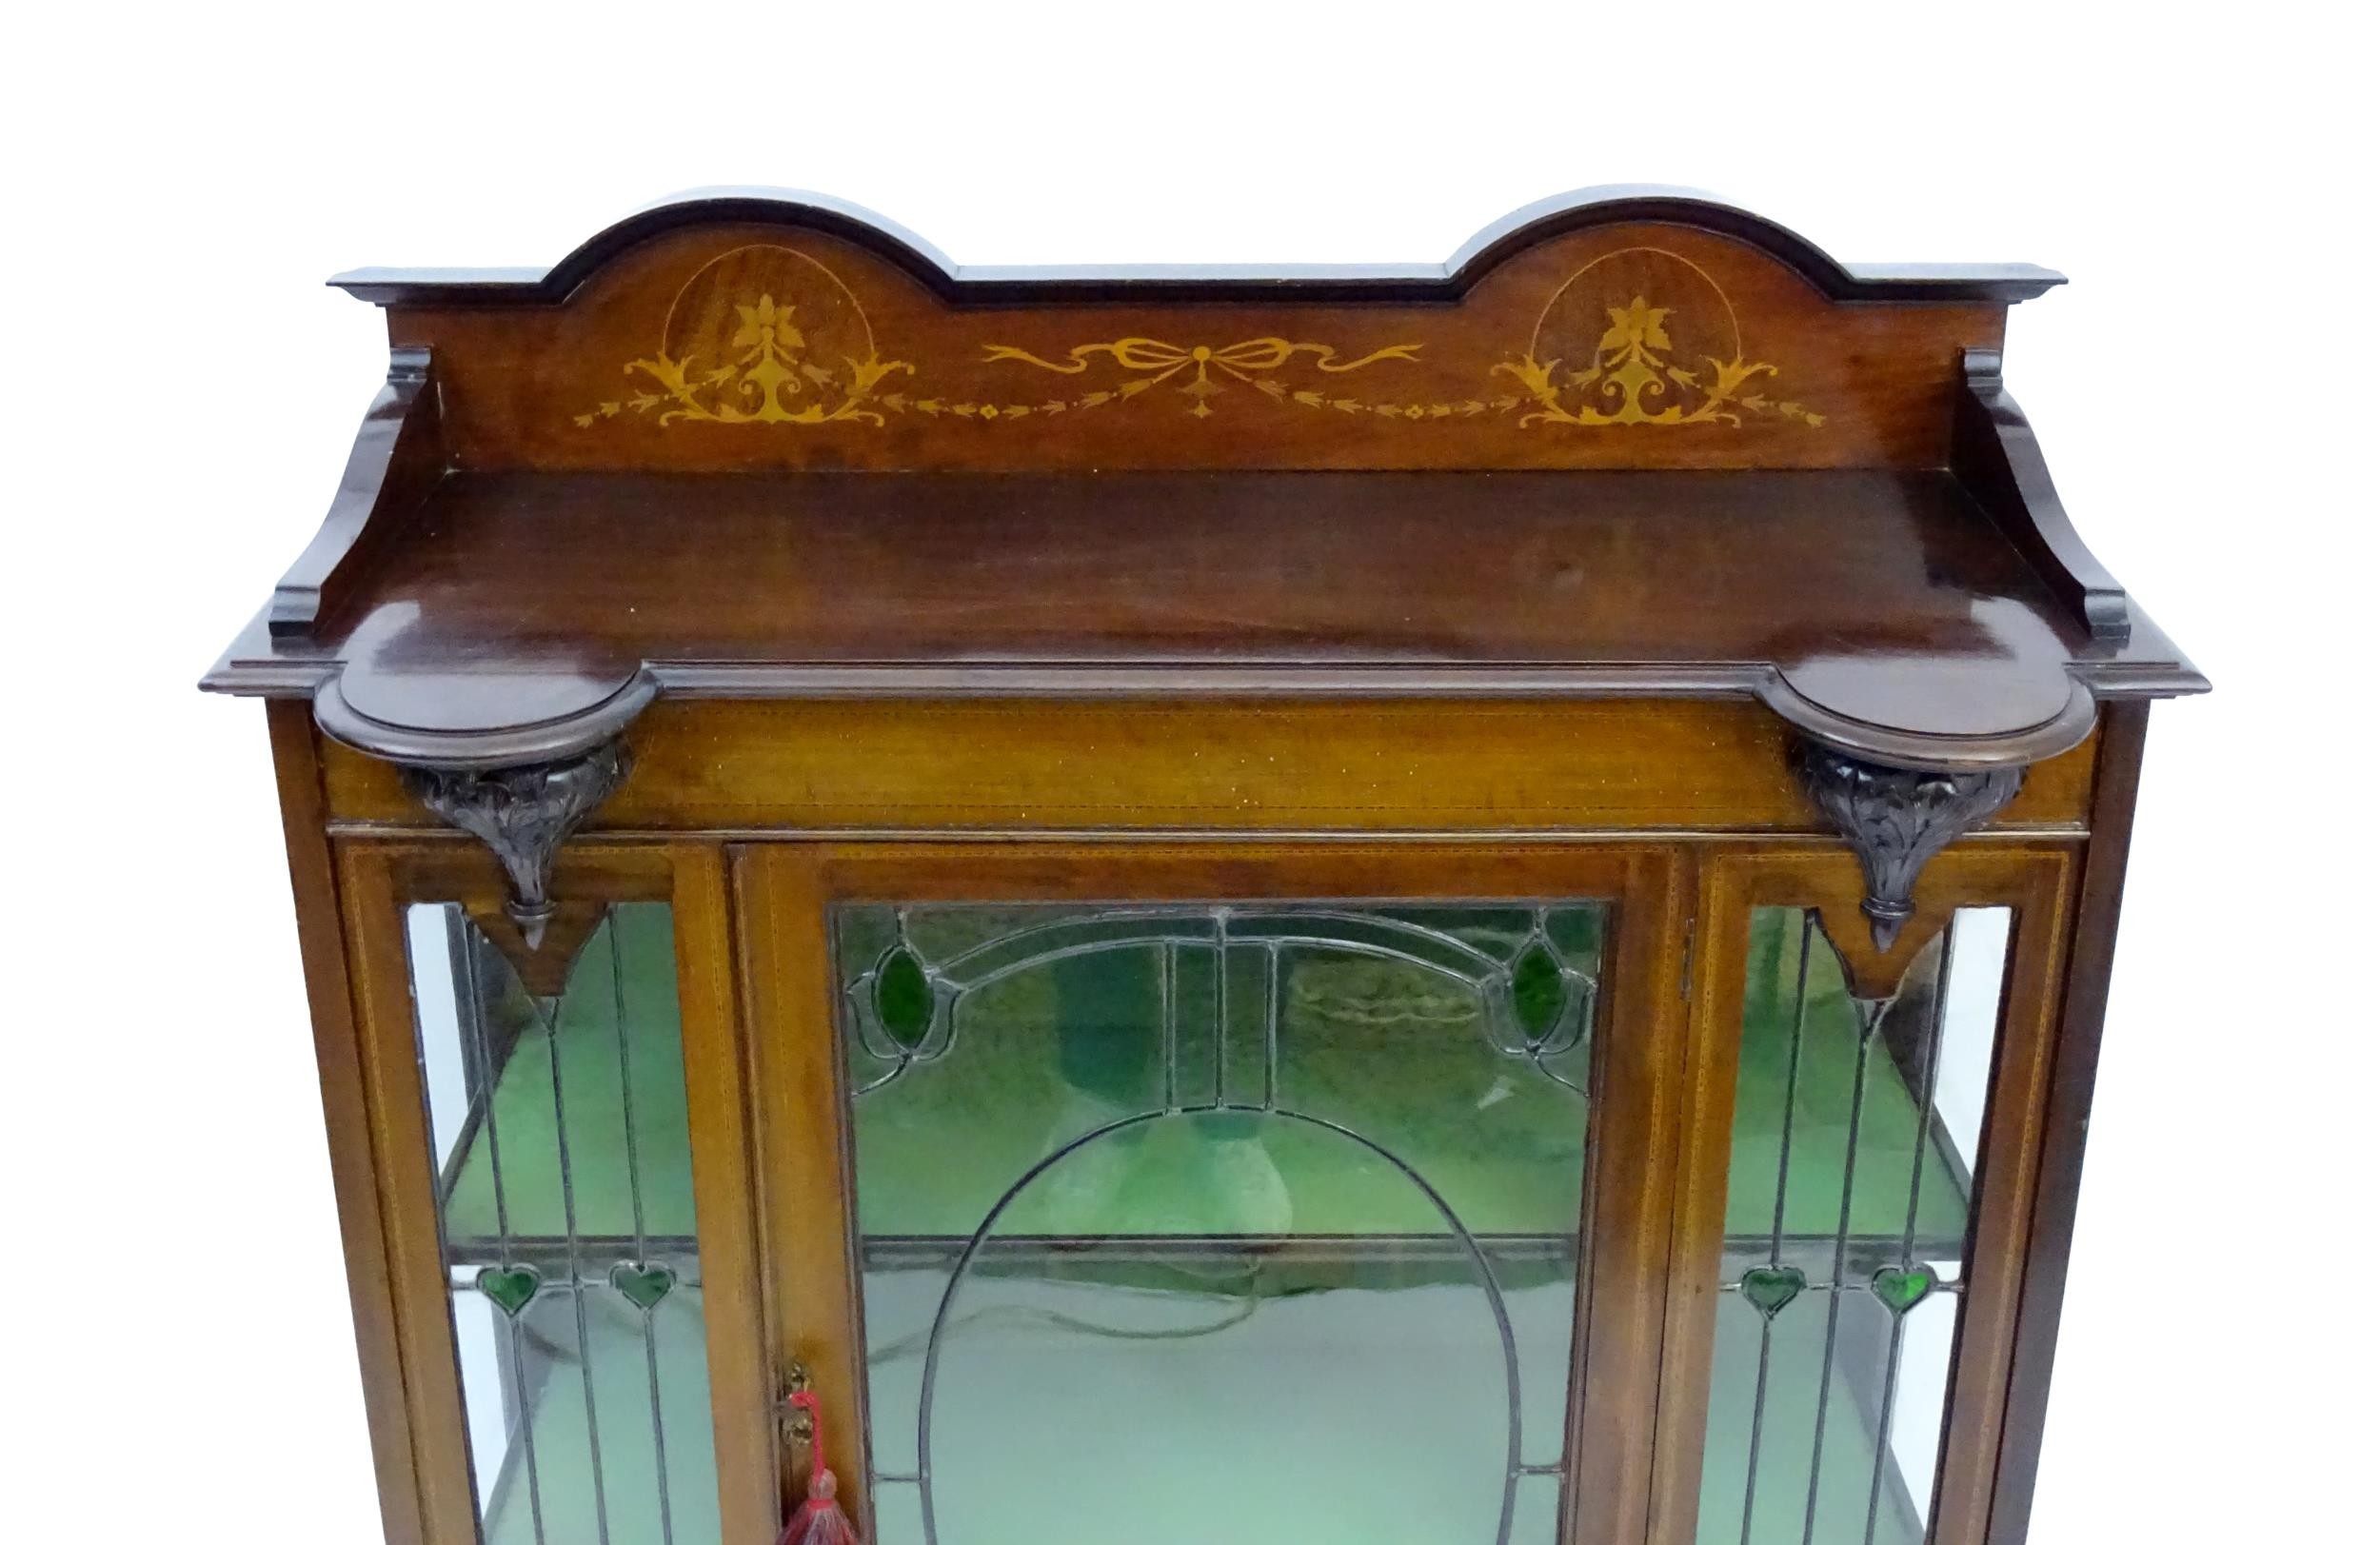 An Edwardian mahogany display cabinet with leaded glass panelling, stained glass panels and a - Image 6 of 12